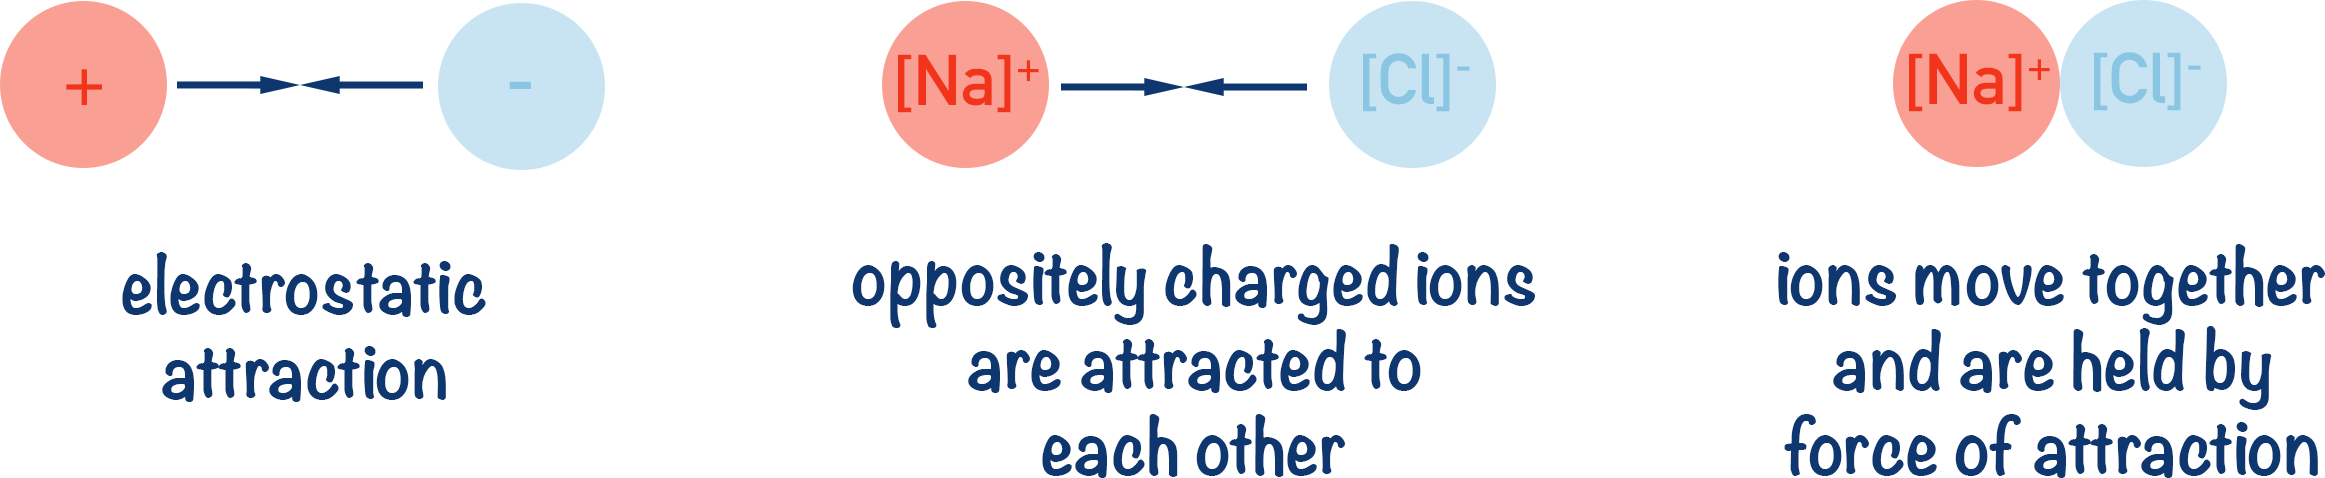 forming of ionic bond NaCl electrostatic attraction